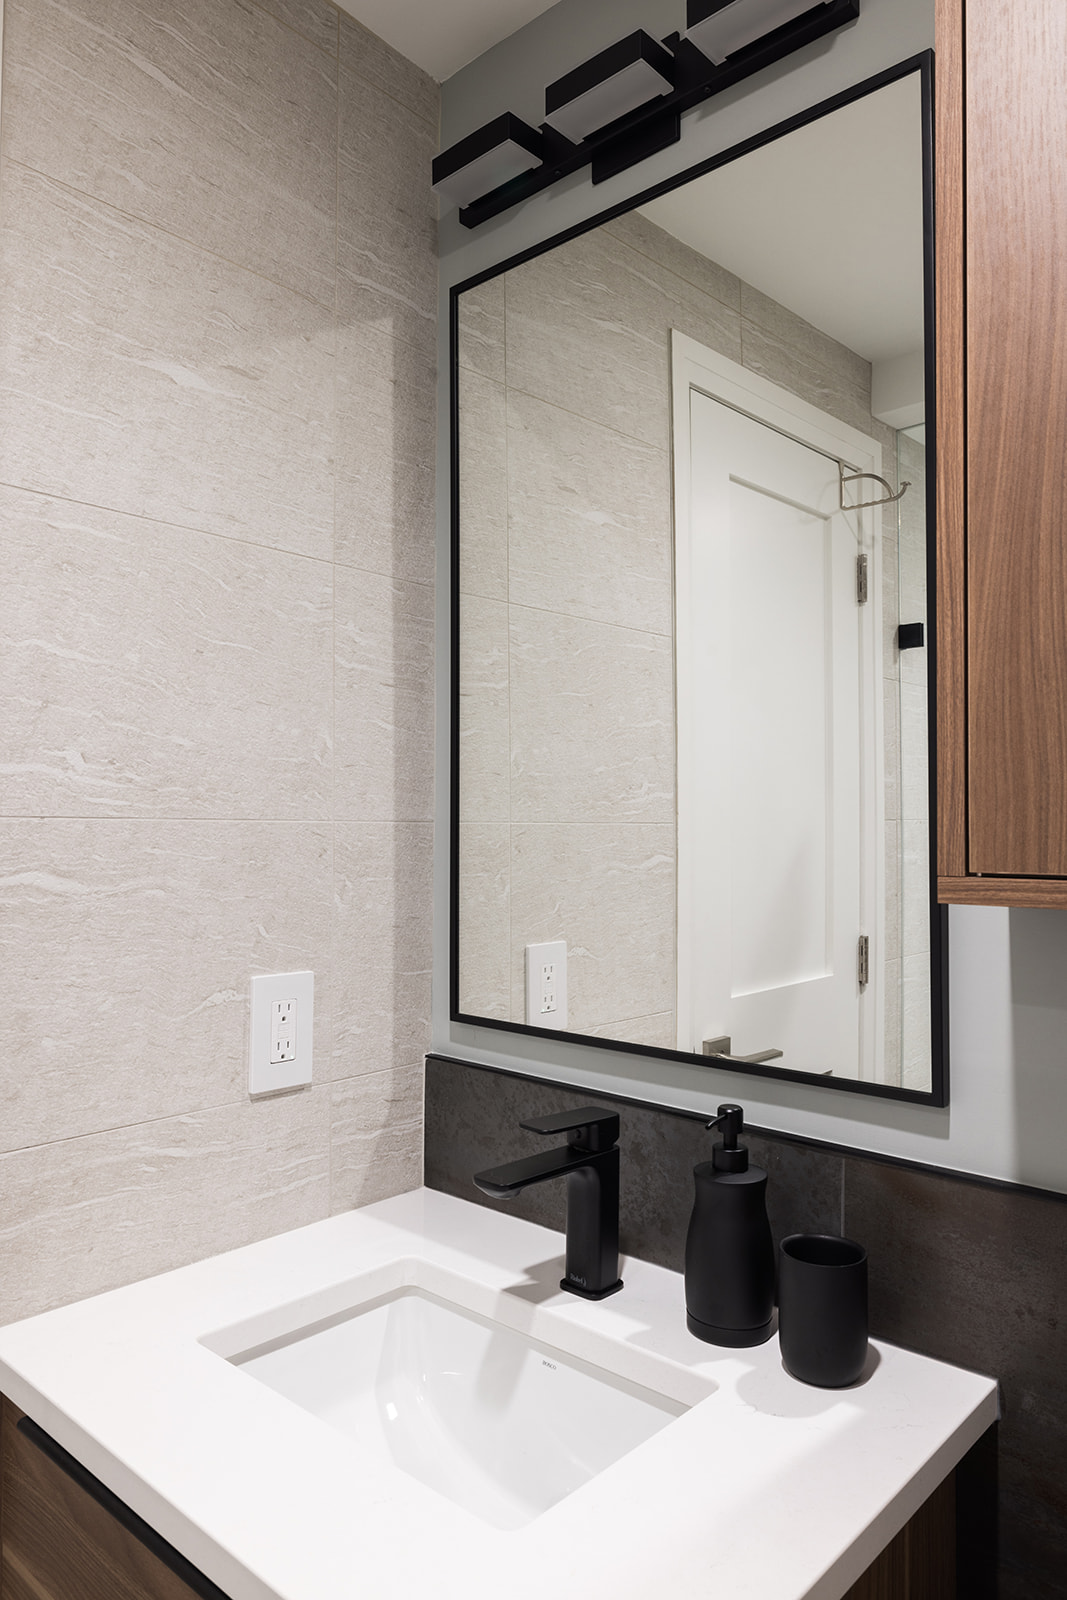 Mirror and sink with black faucet fixture in luxury condo bathroom renovation in downtown Toronto